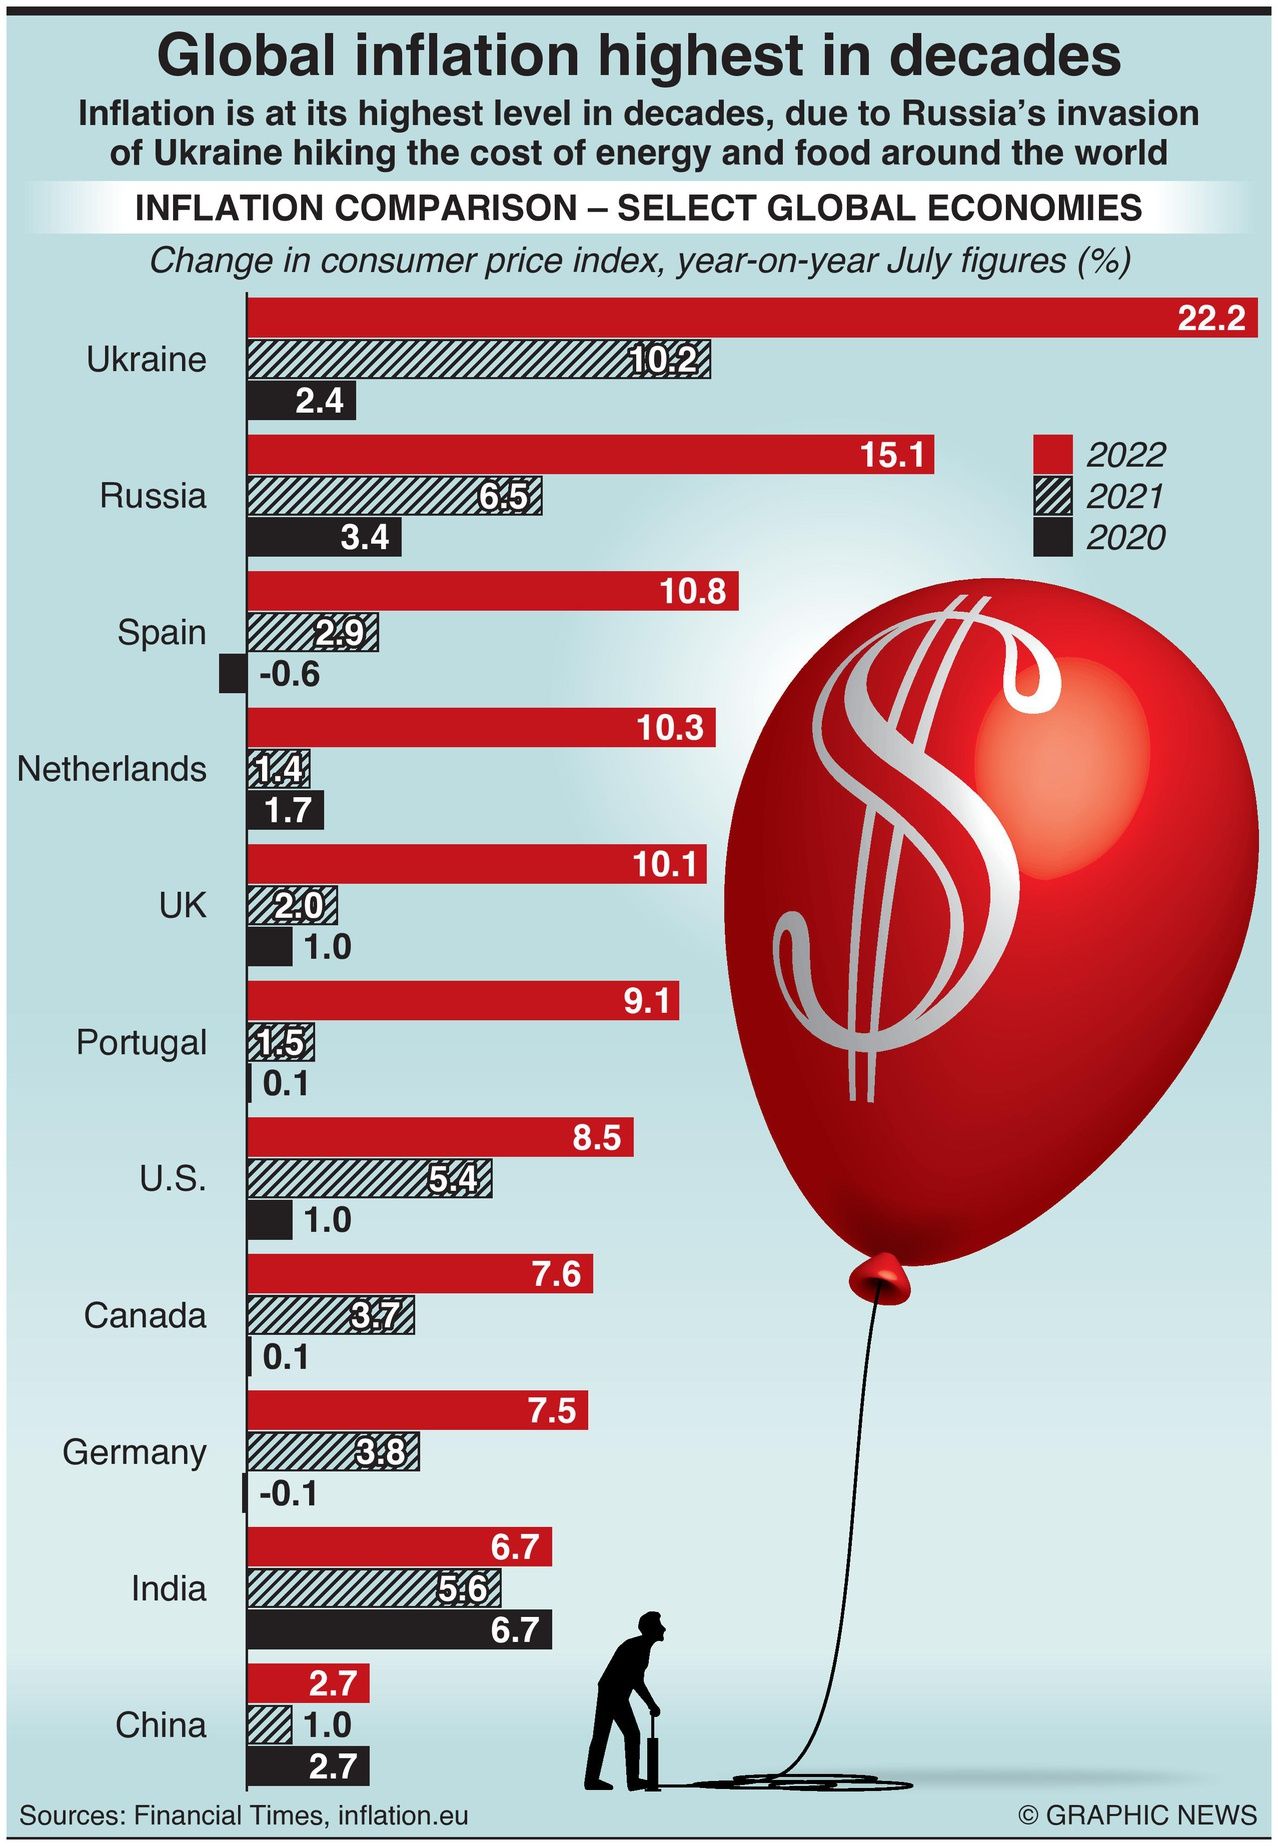 Global inflation due to russias invasion of Ukraine